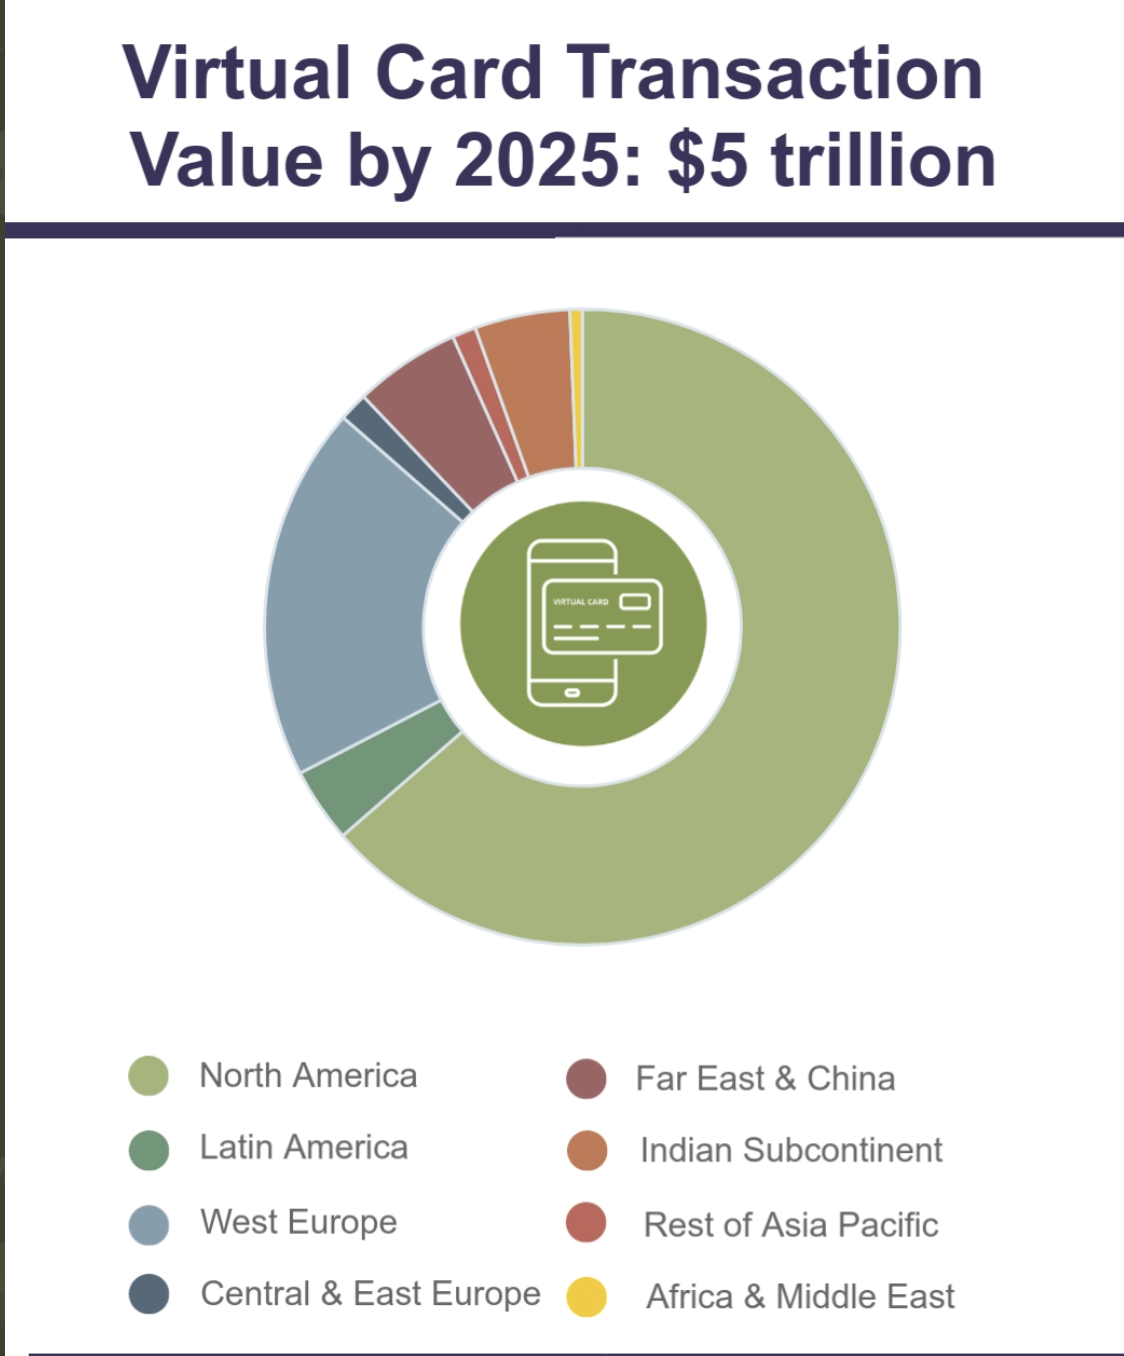 Virtual card adoption predicted to accelerate to veer $5 trillion in value by 2025